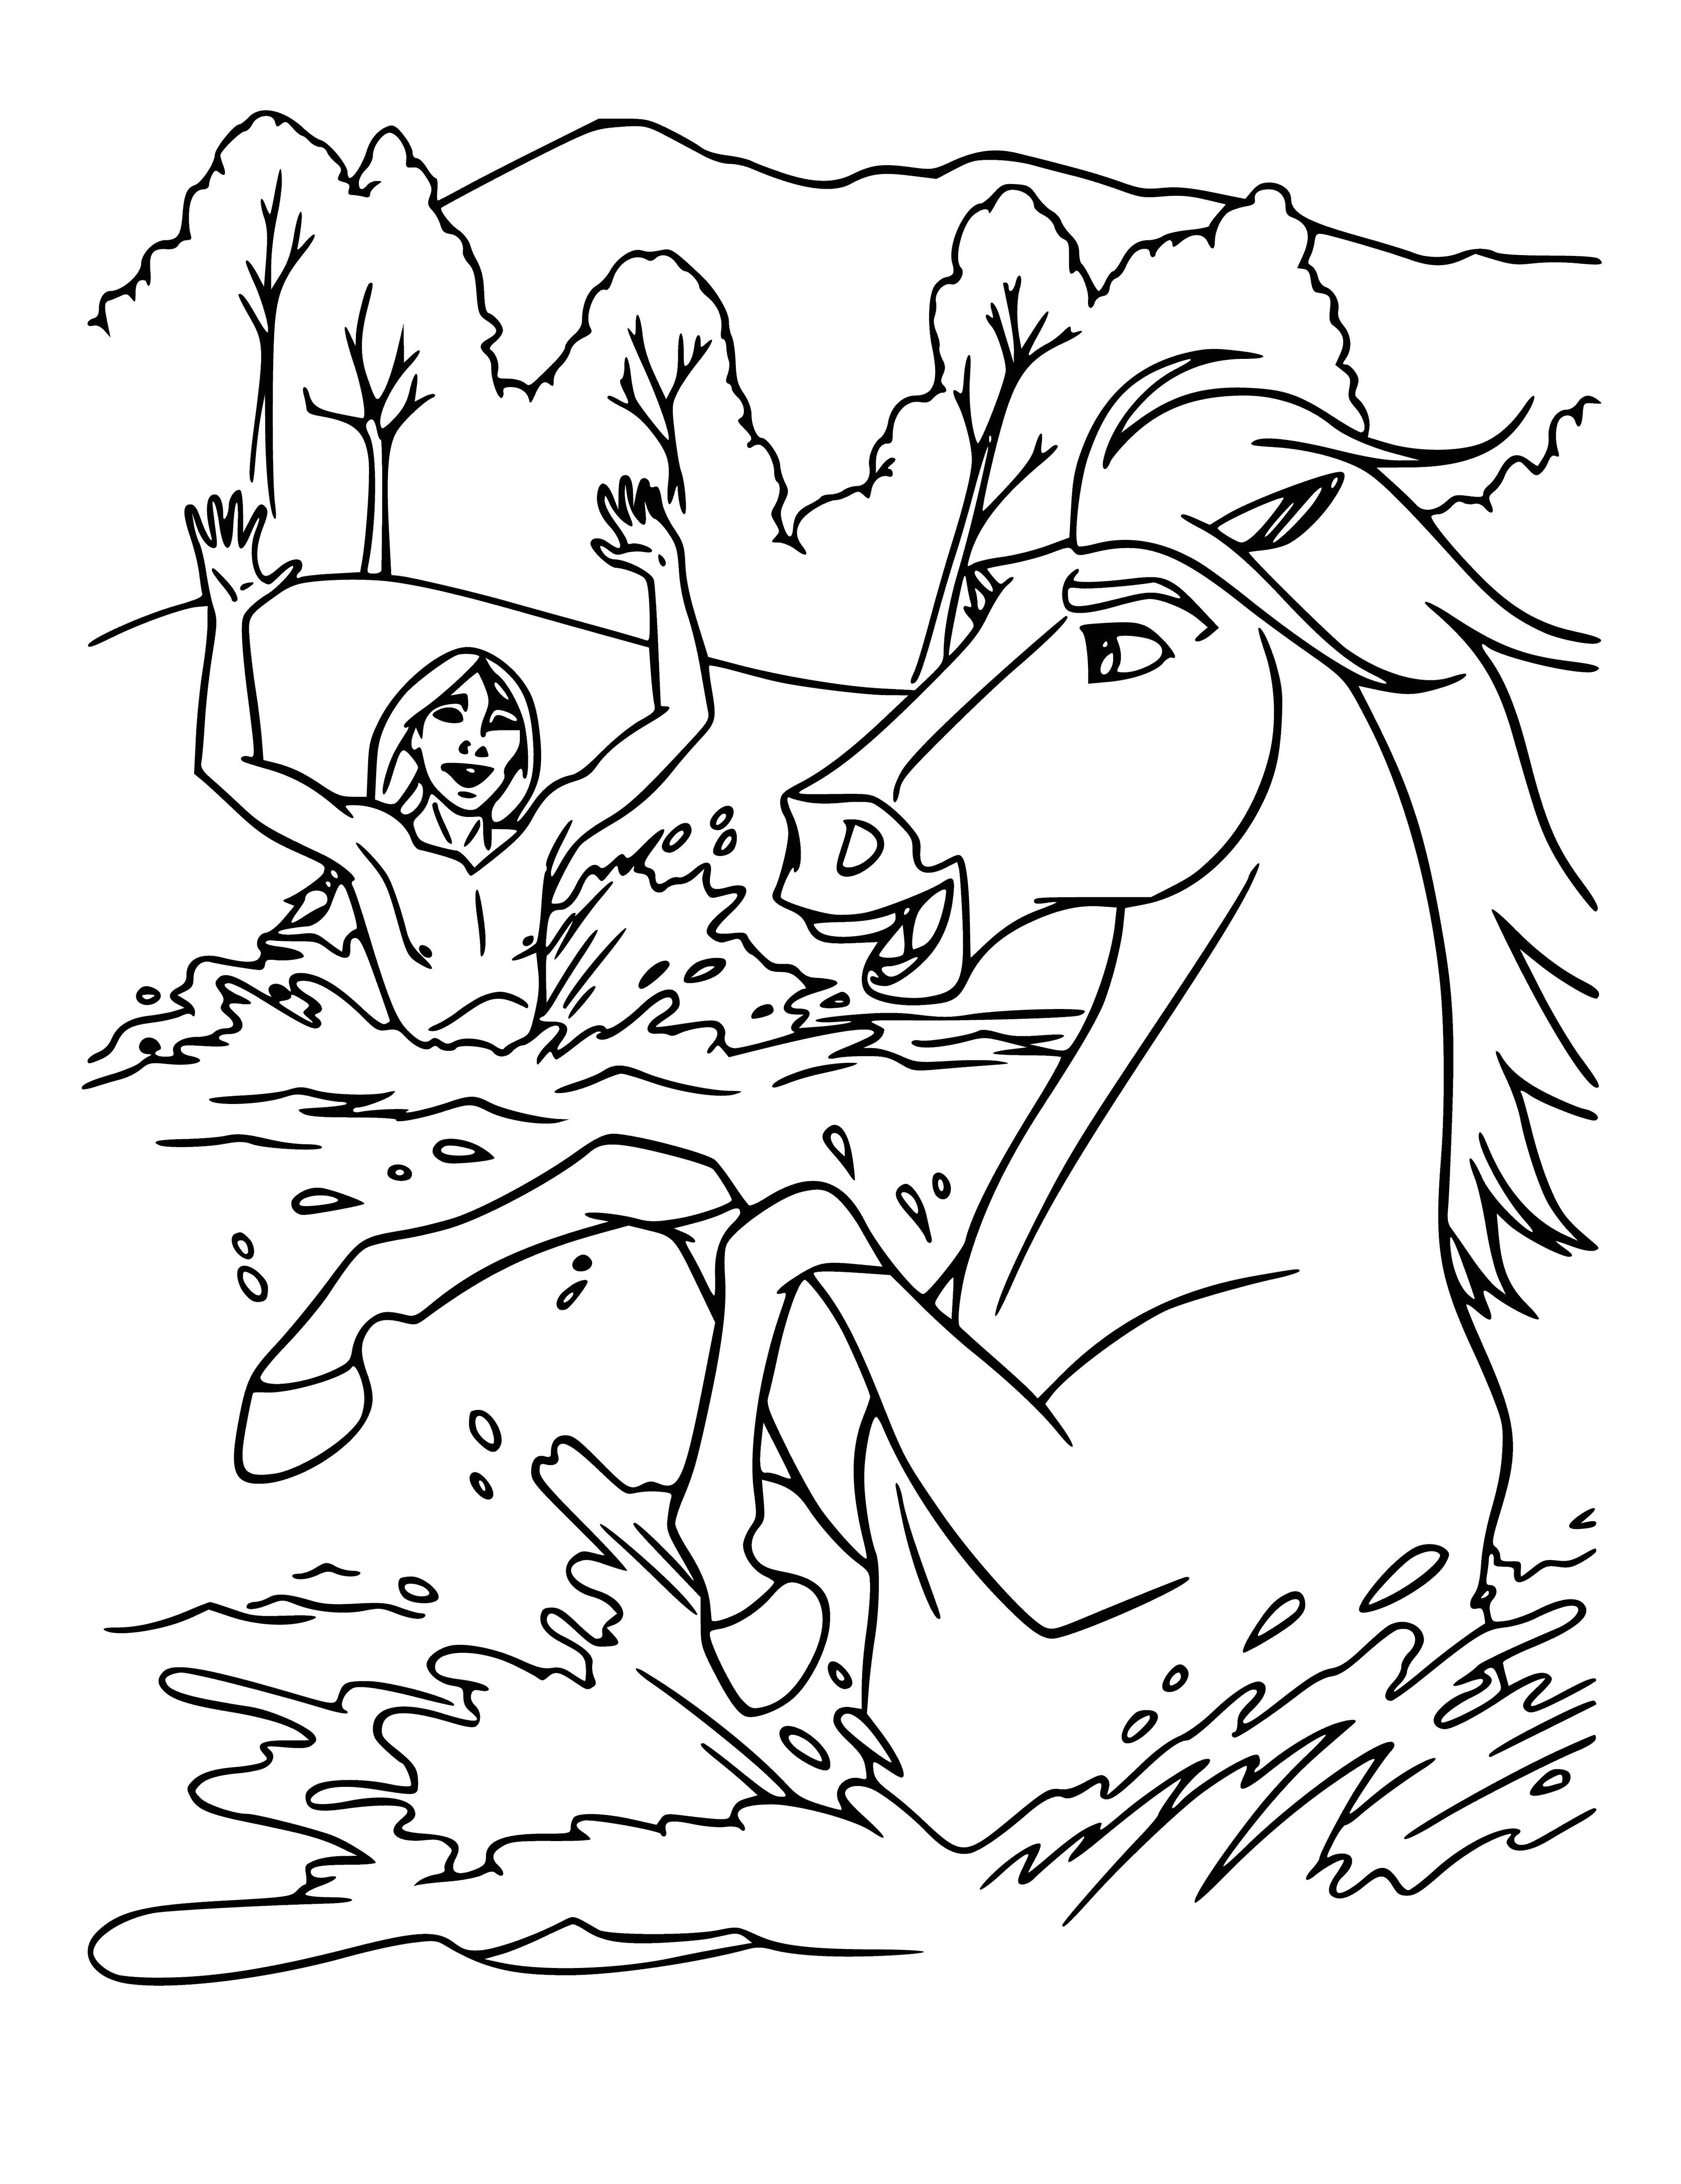 coloring page: A majestic horse is shown basking in the river’s beauty; the animal’s power is illuminated in the glistening water, and it appears relaxed and content in its peaceful surrounding.